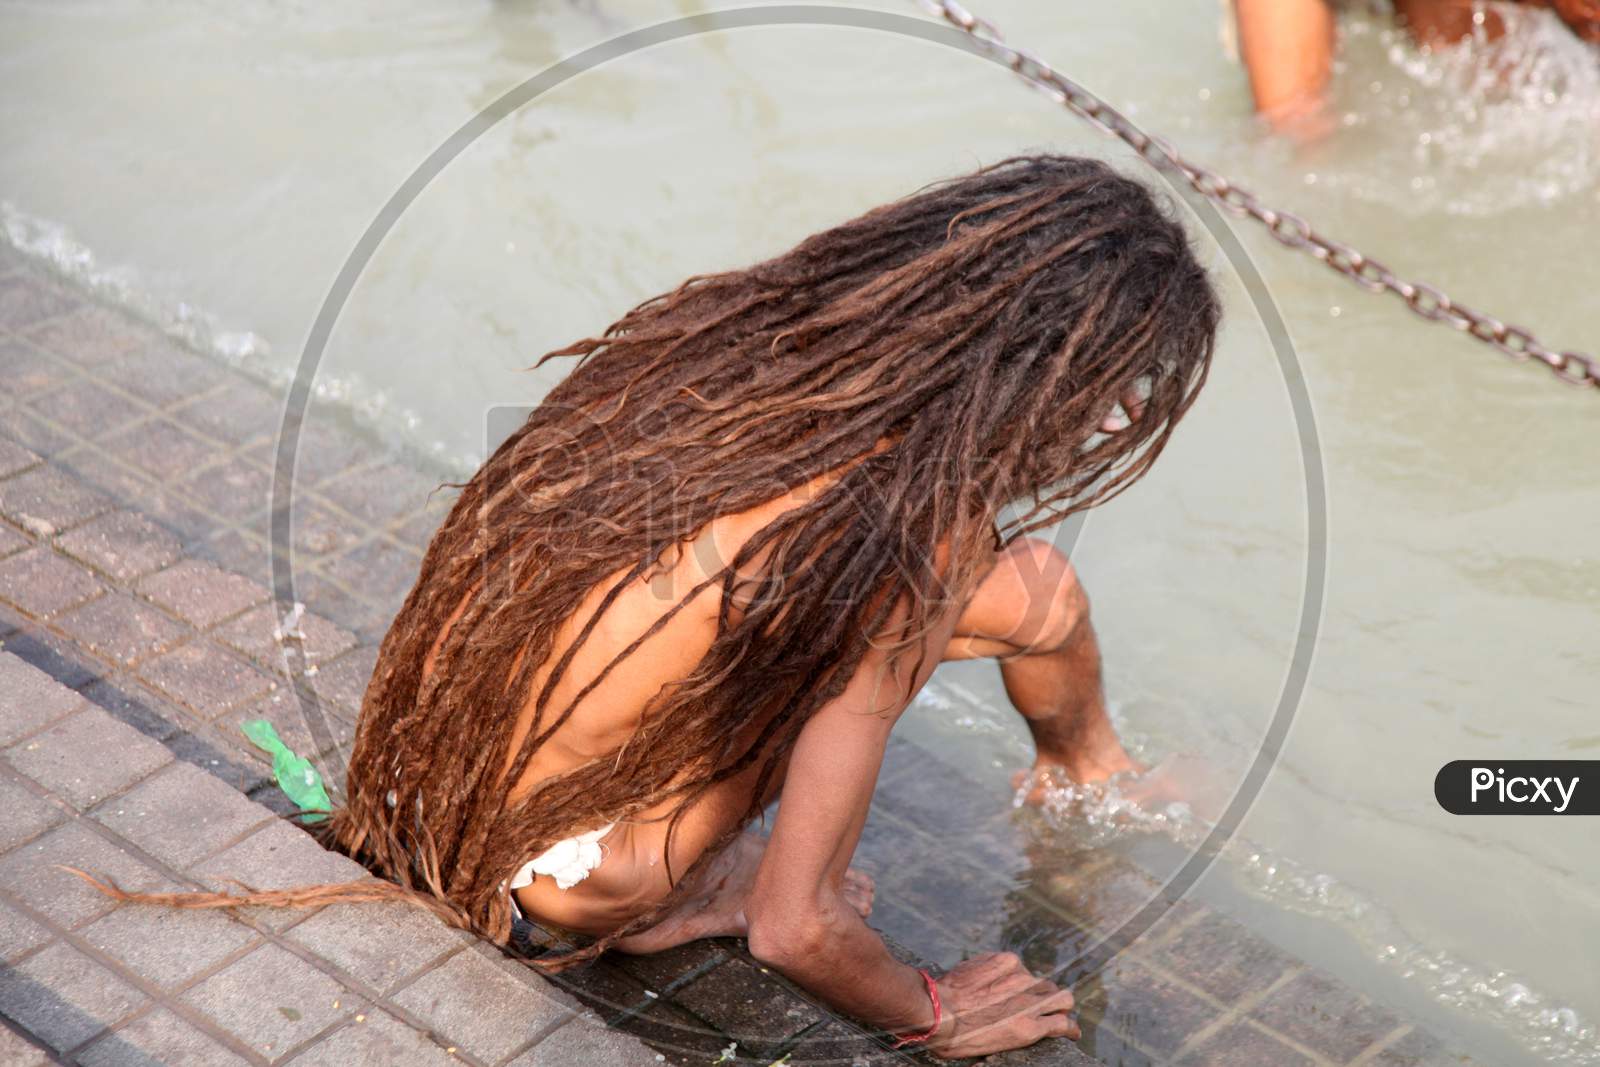 A Sadhu or Baba stepping to a river